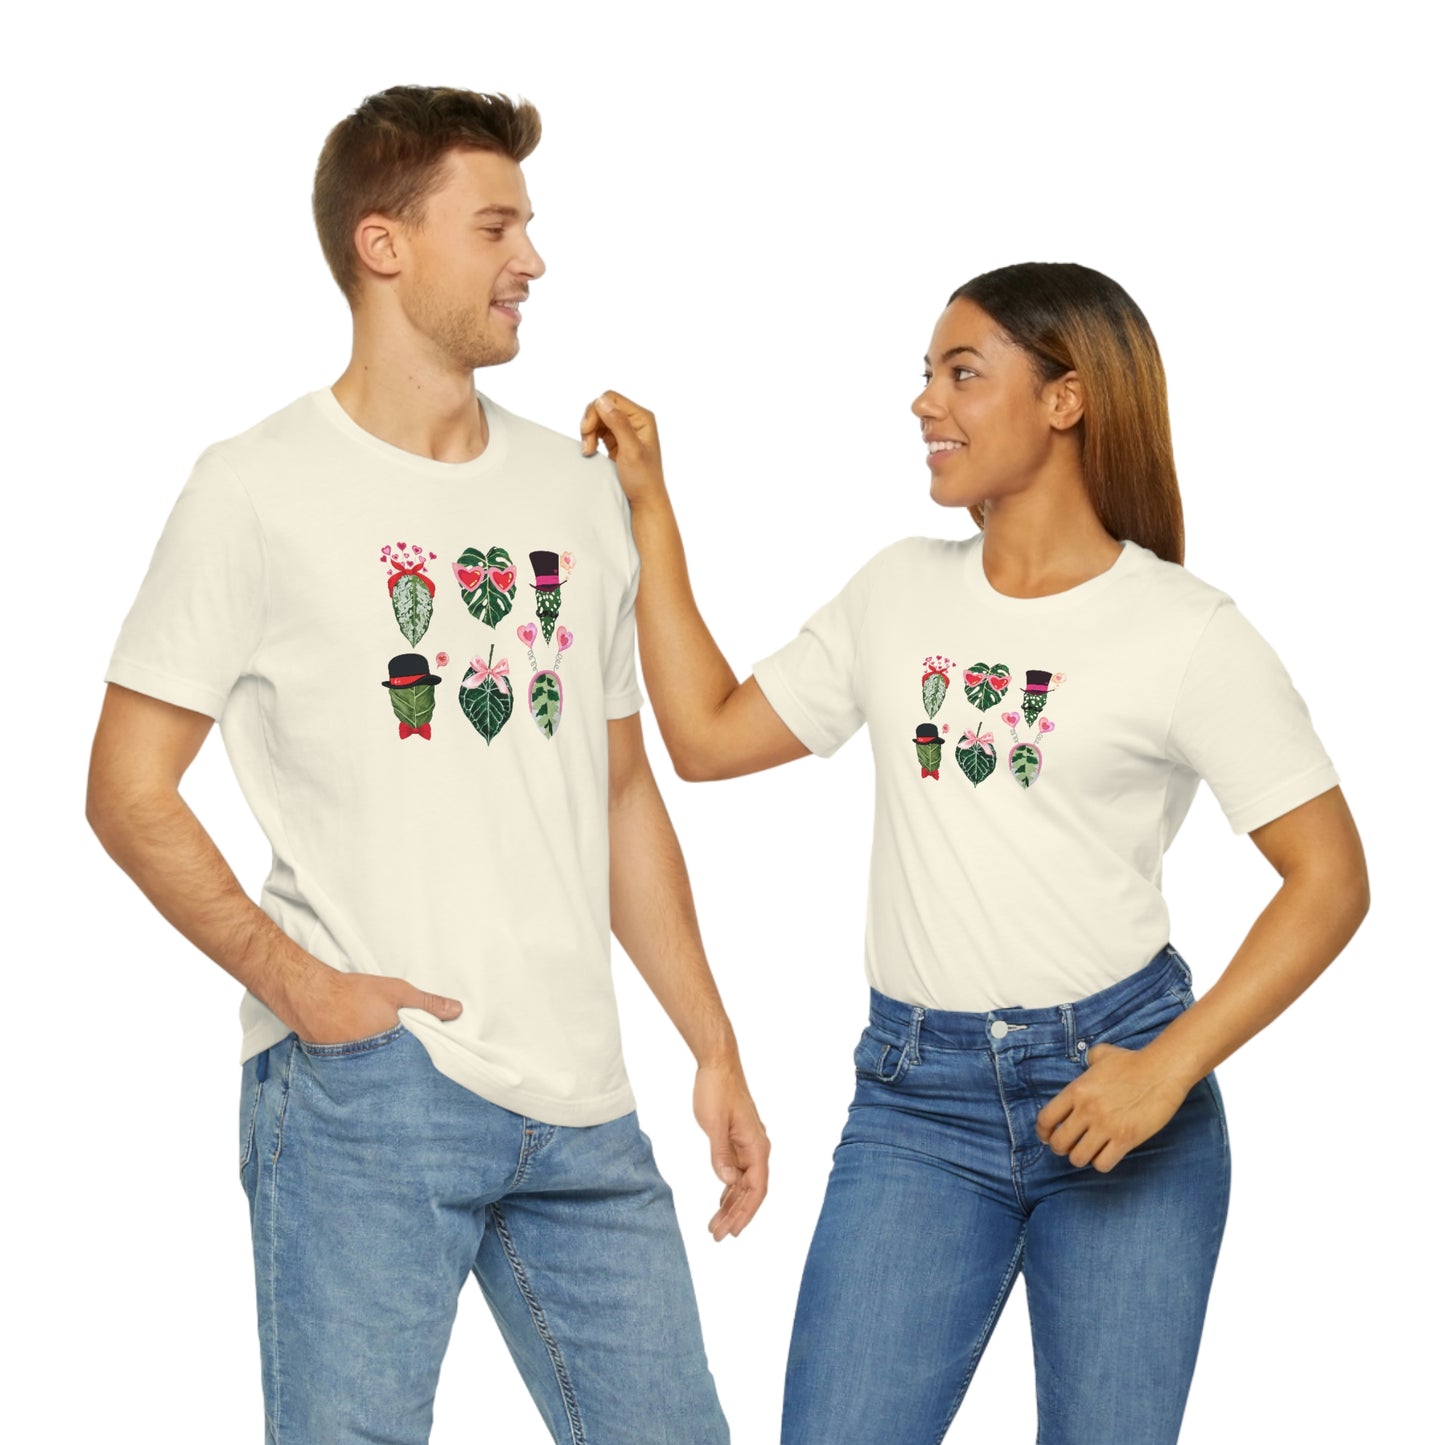 Plant Valentine’s Day for plant daddy or plant lady. Cute plant lover tshirt